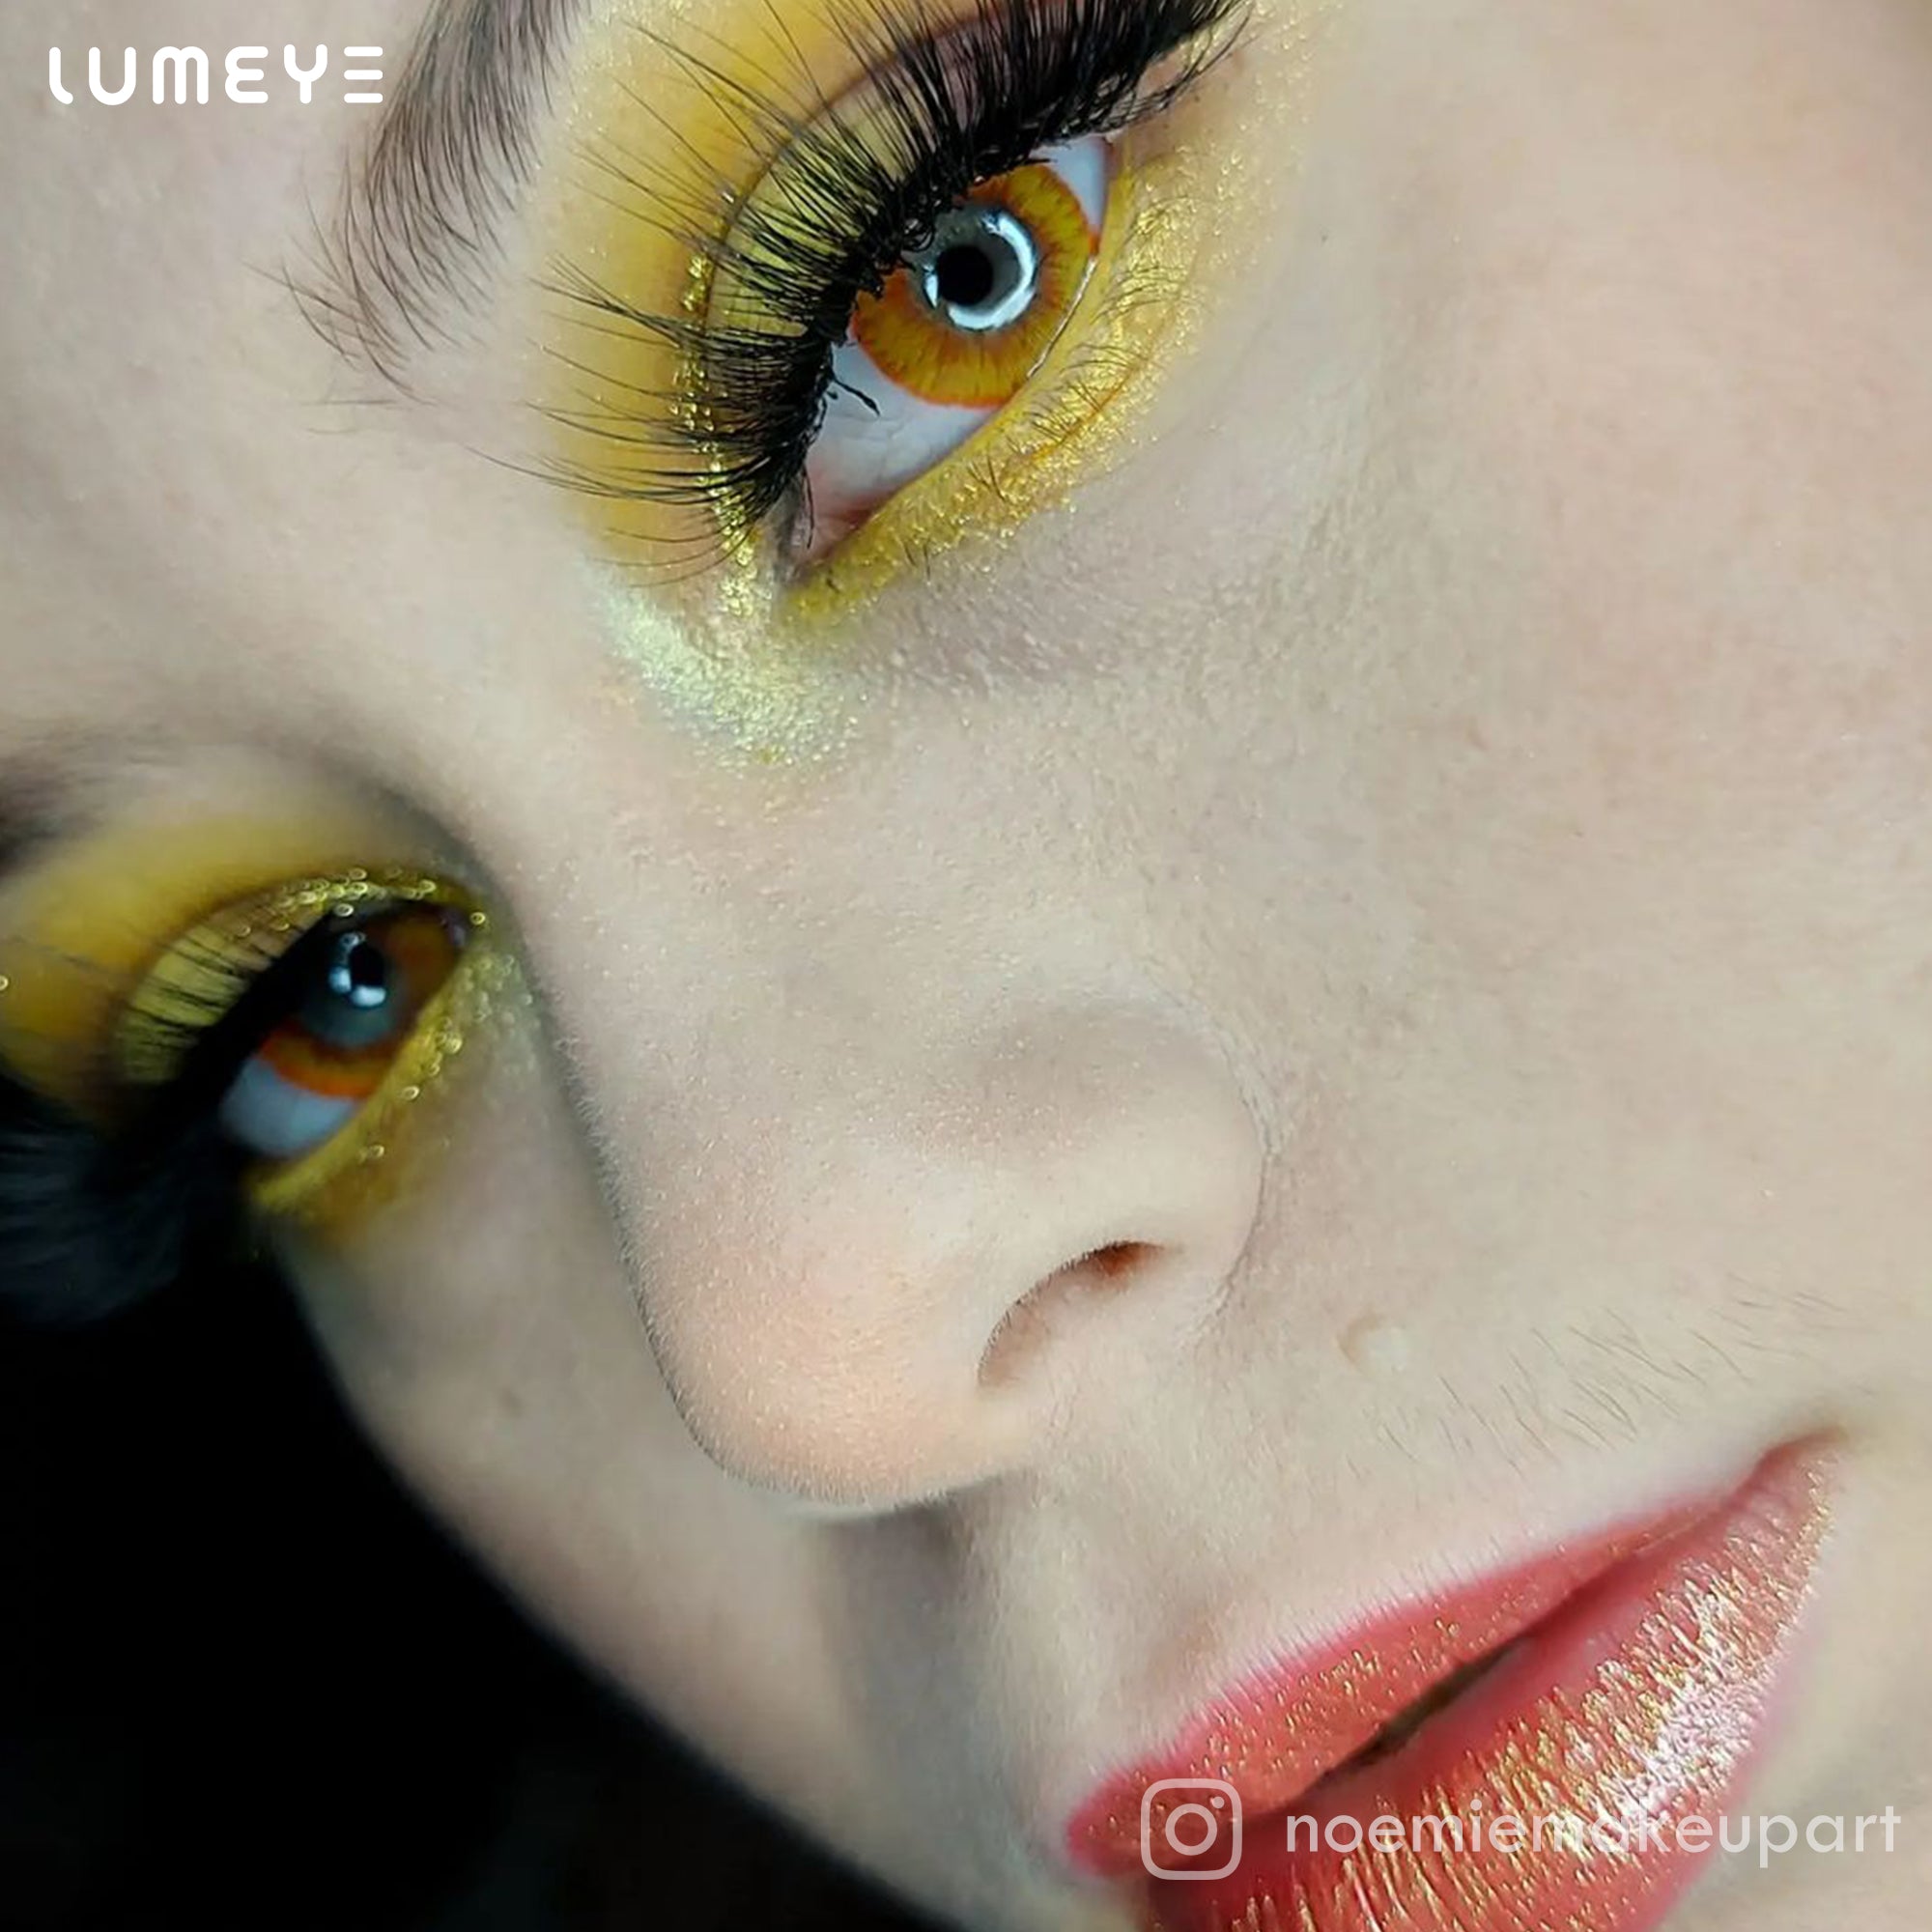 Best COLORED CONTACTS - LUMEYE Iron Man Yellow Colored Contact Lenses - LUMEYE